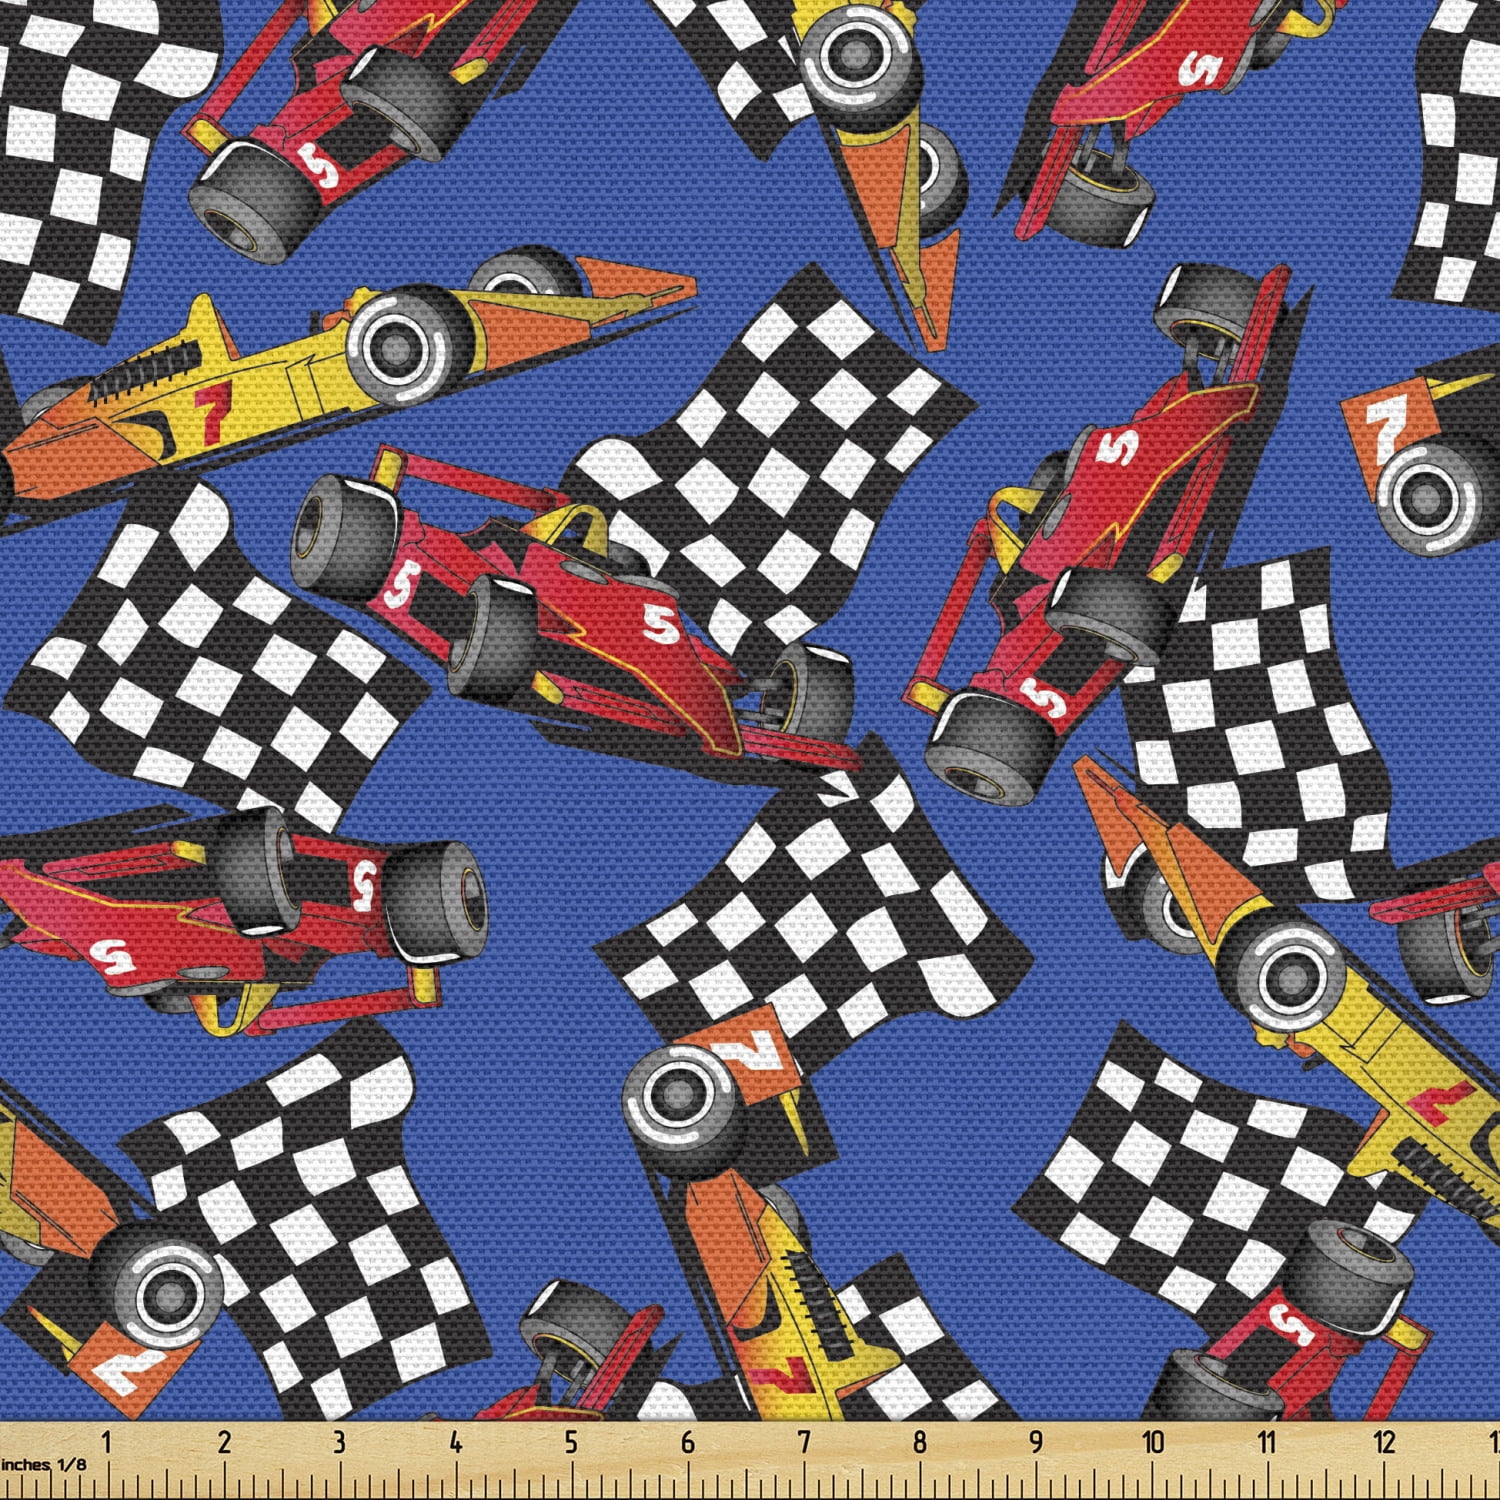 Uretfærdighed brugervejledning vandrerhjemmet Race Car Sofa Upholstery Fabric by the Yard, Cartoon Style Interpretation  of Checkered Flags and Automobile, Decorative Fabric for DIY & Home  Accents, 3 Yards, Cobalt Blue and Multicolor by Ambesonne - Walmart.com